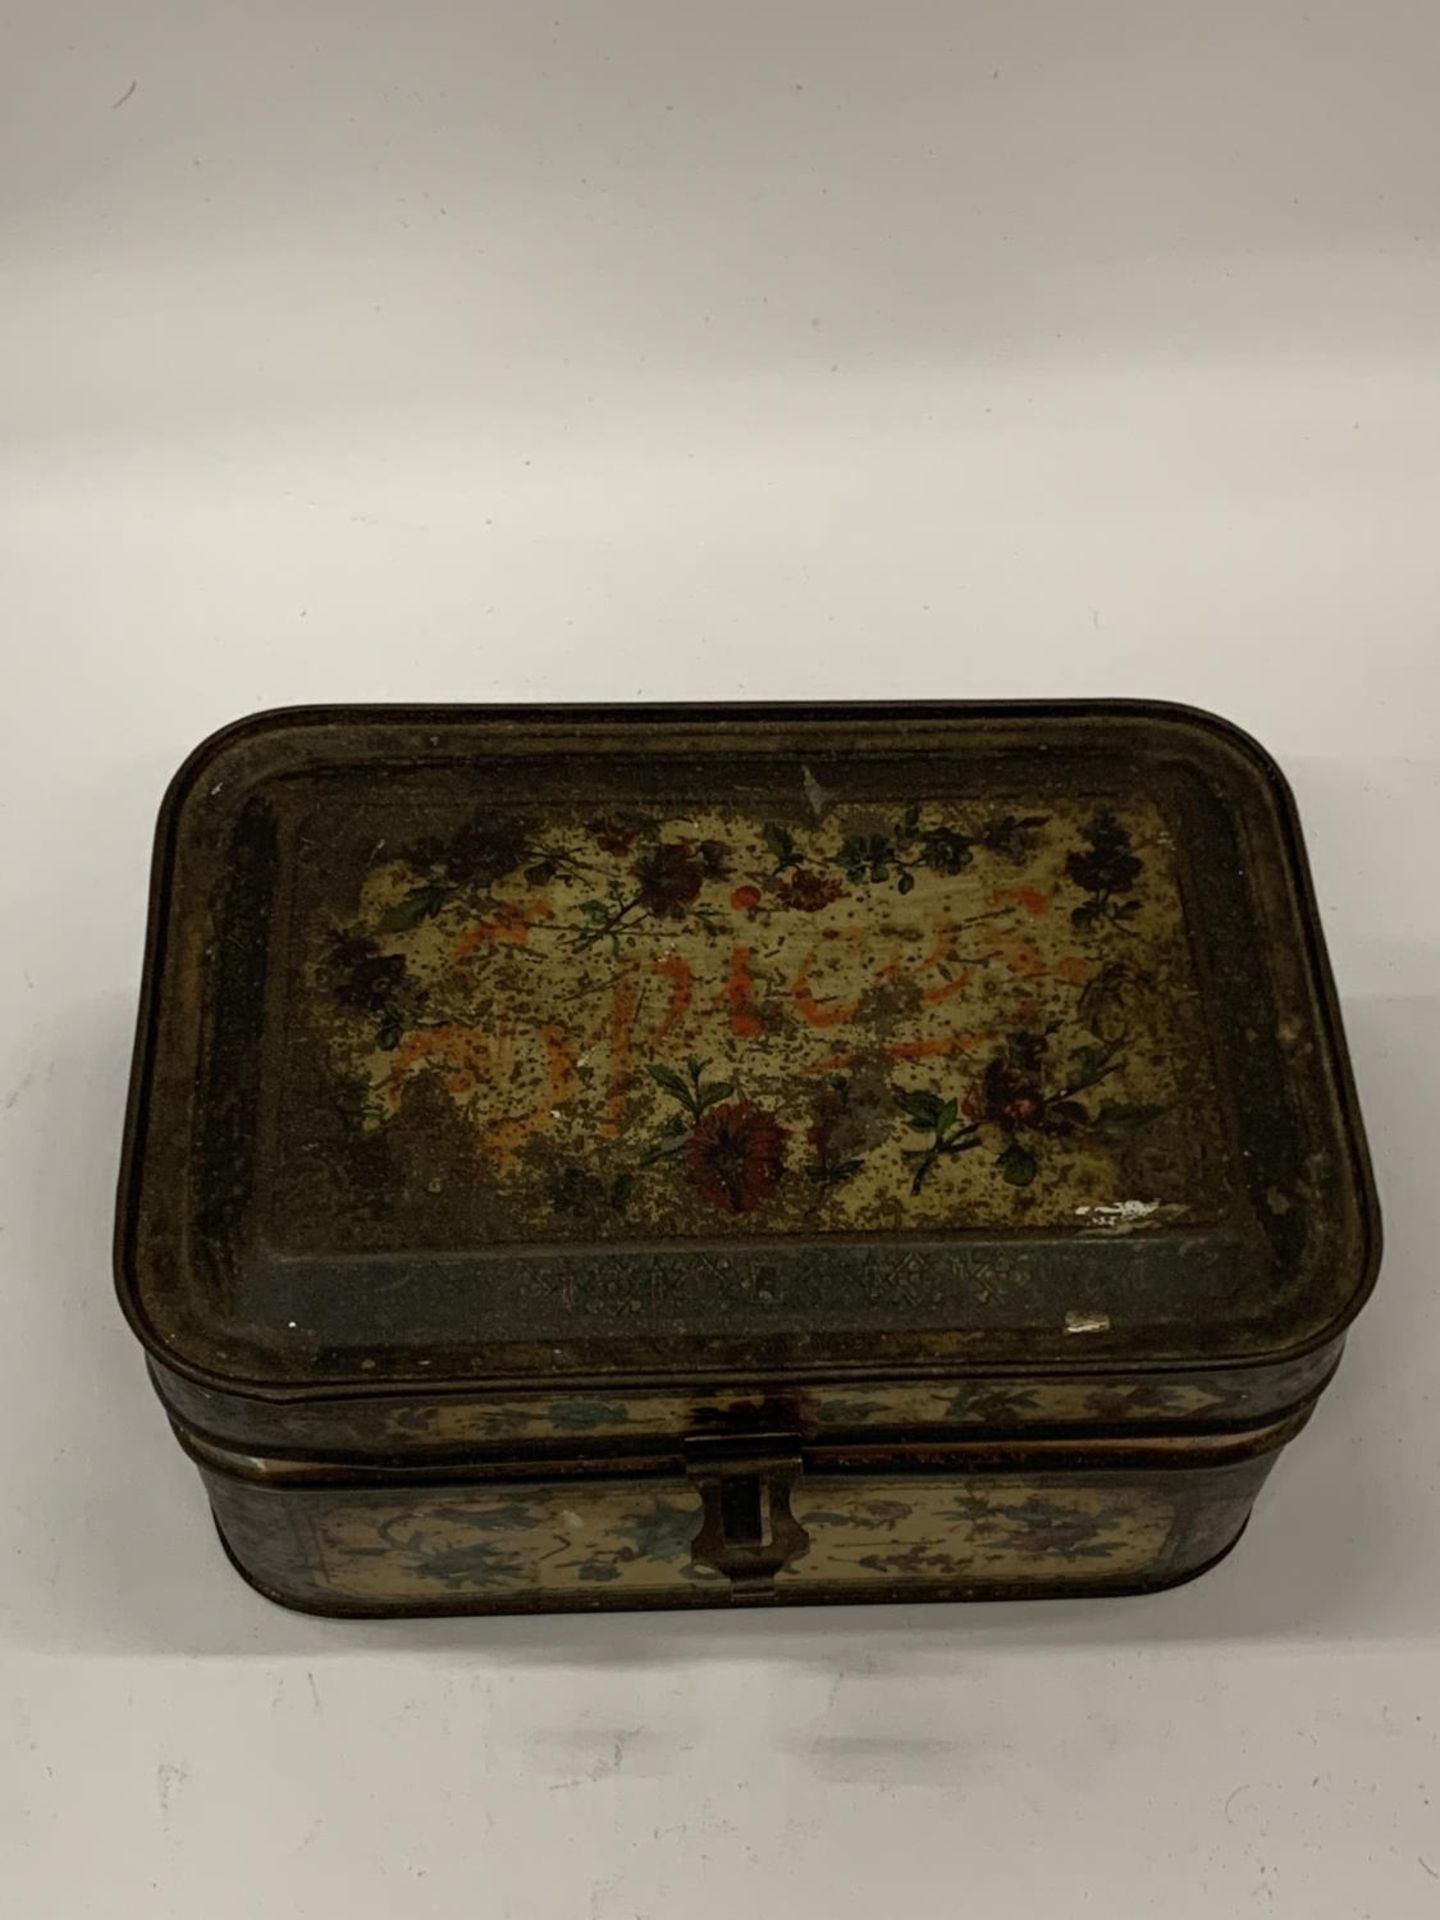 A VINTAGE 1940'S TIN METAL SPICE CHEST WITH SIX INNER LIDDED SPICE CONTAINERS - Image 6 of 6